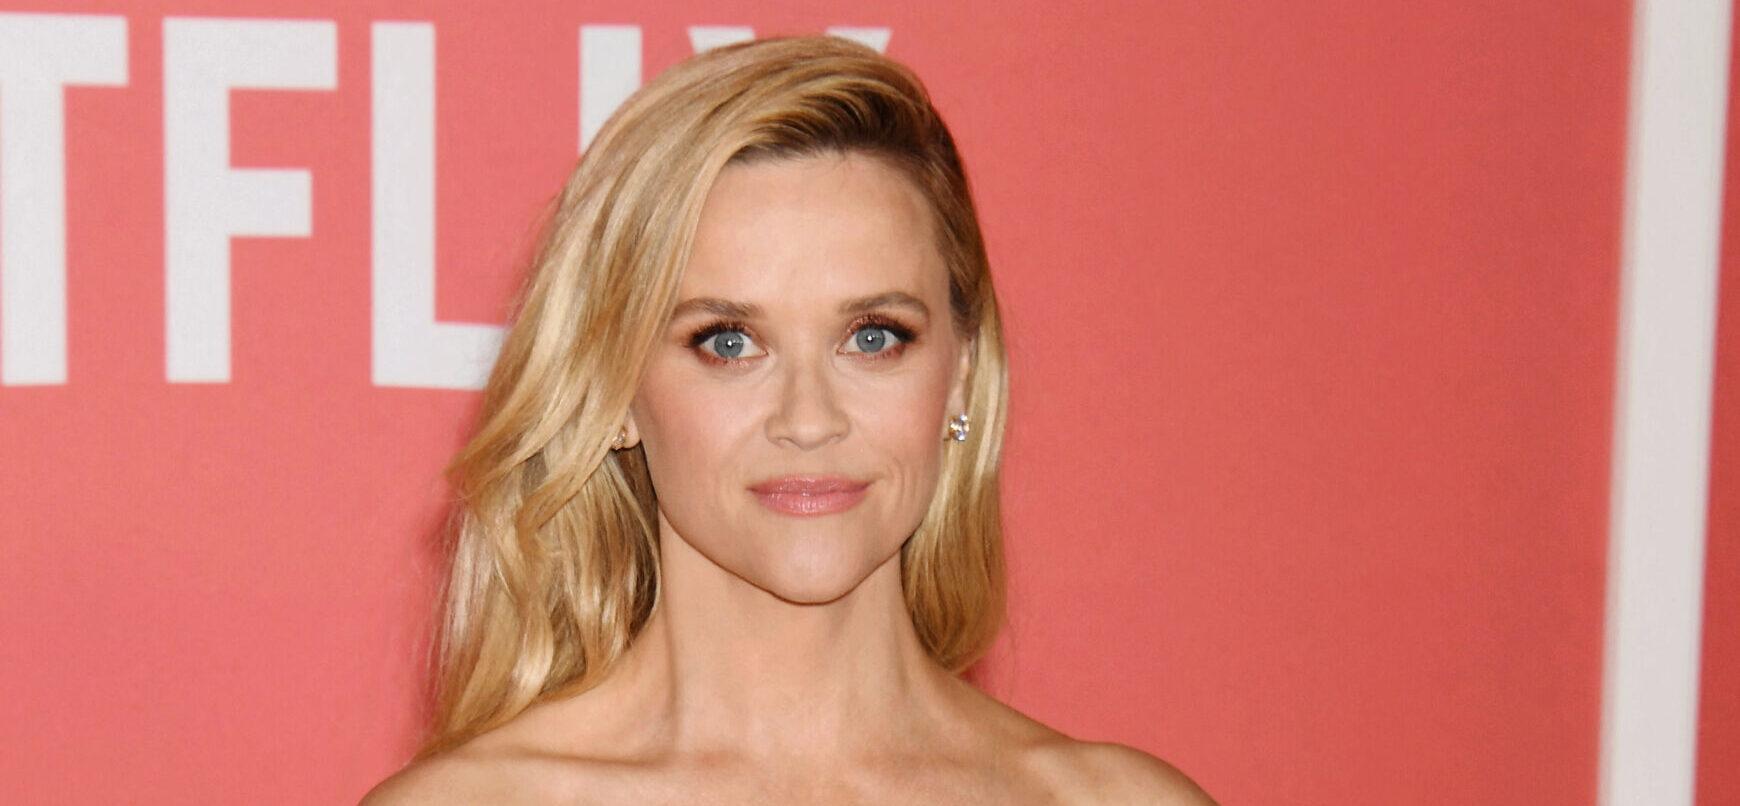 Reese Witherspoon Has A 'Warning' For Parents Amid 'Brutal' Israel War